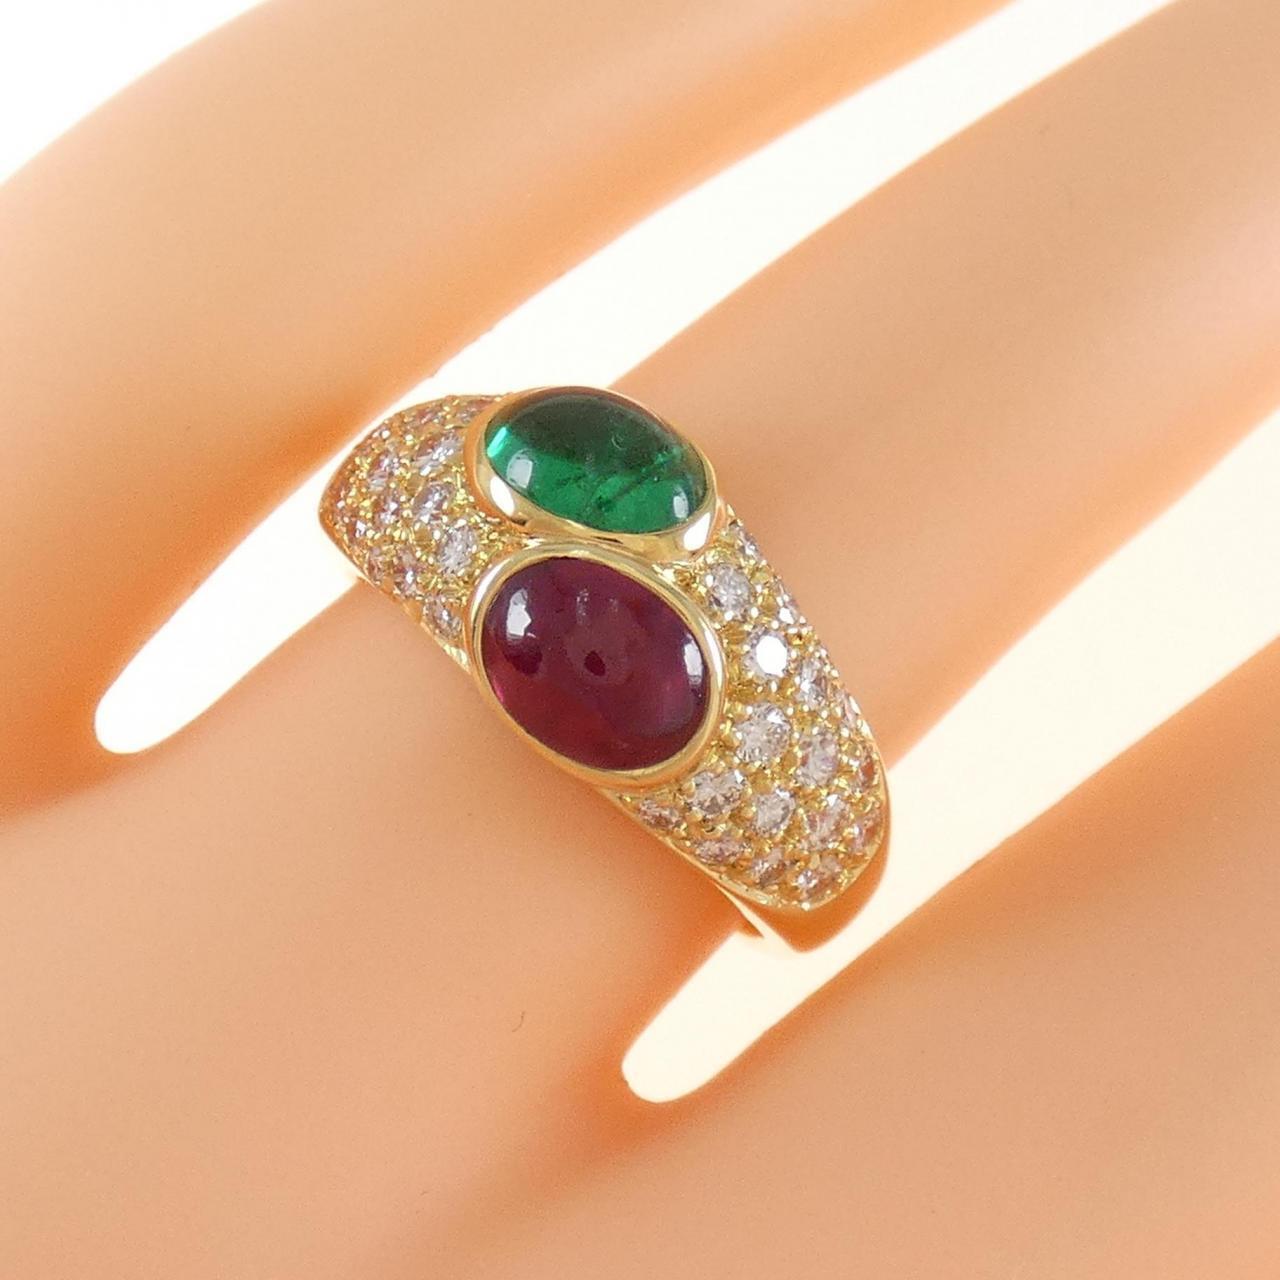 Women's or Men's Bvlgari Made in France 18k Yellow Gold, Diamond, Cabochon Emerald & Ruby Ring